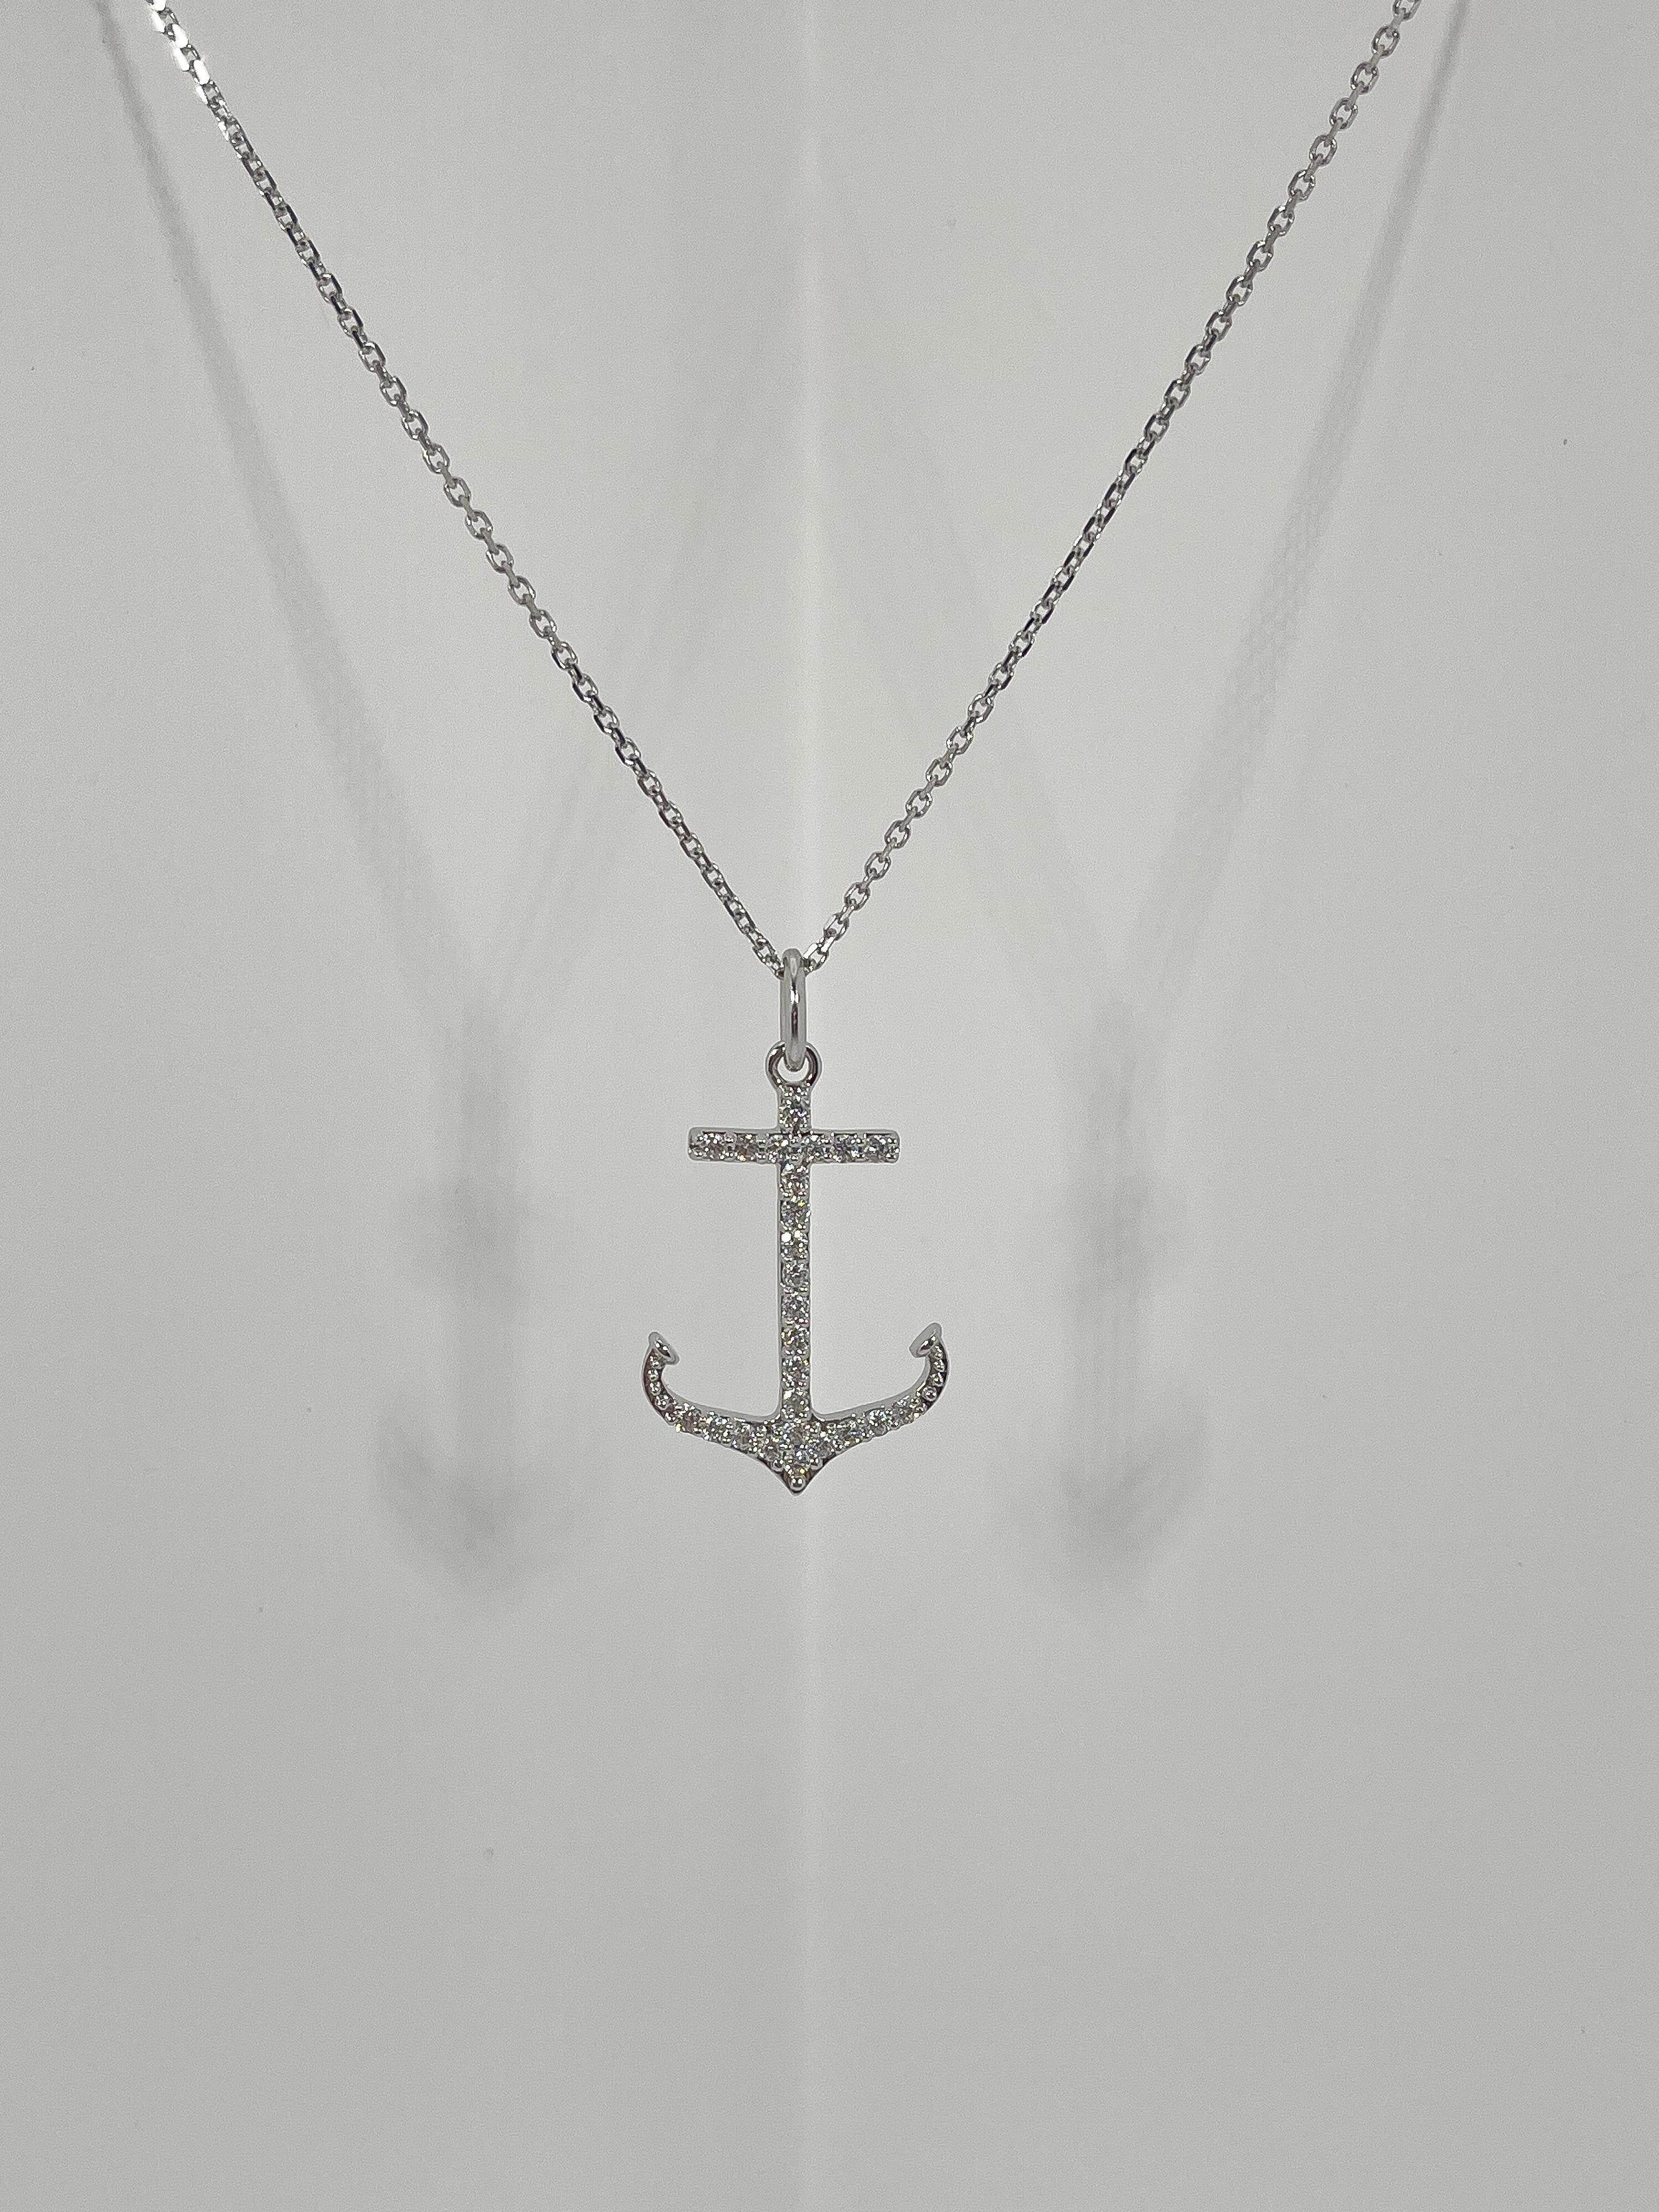 14k white gold .50 CTW diamond anchor pendant necklace. The pendant comes on an 18 inch cable chain, has a measurement of 27.7 x 18.5 mm, and the total weight of the necklace is 4.3 grams